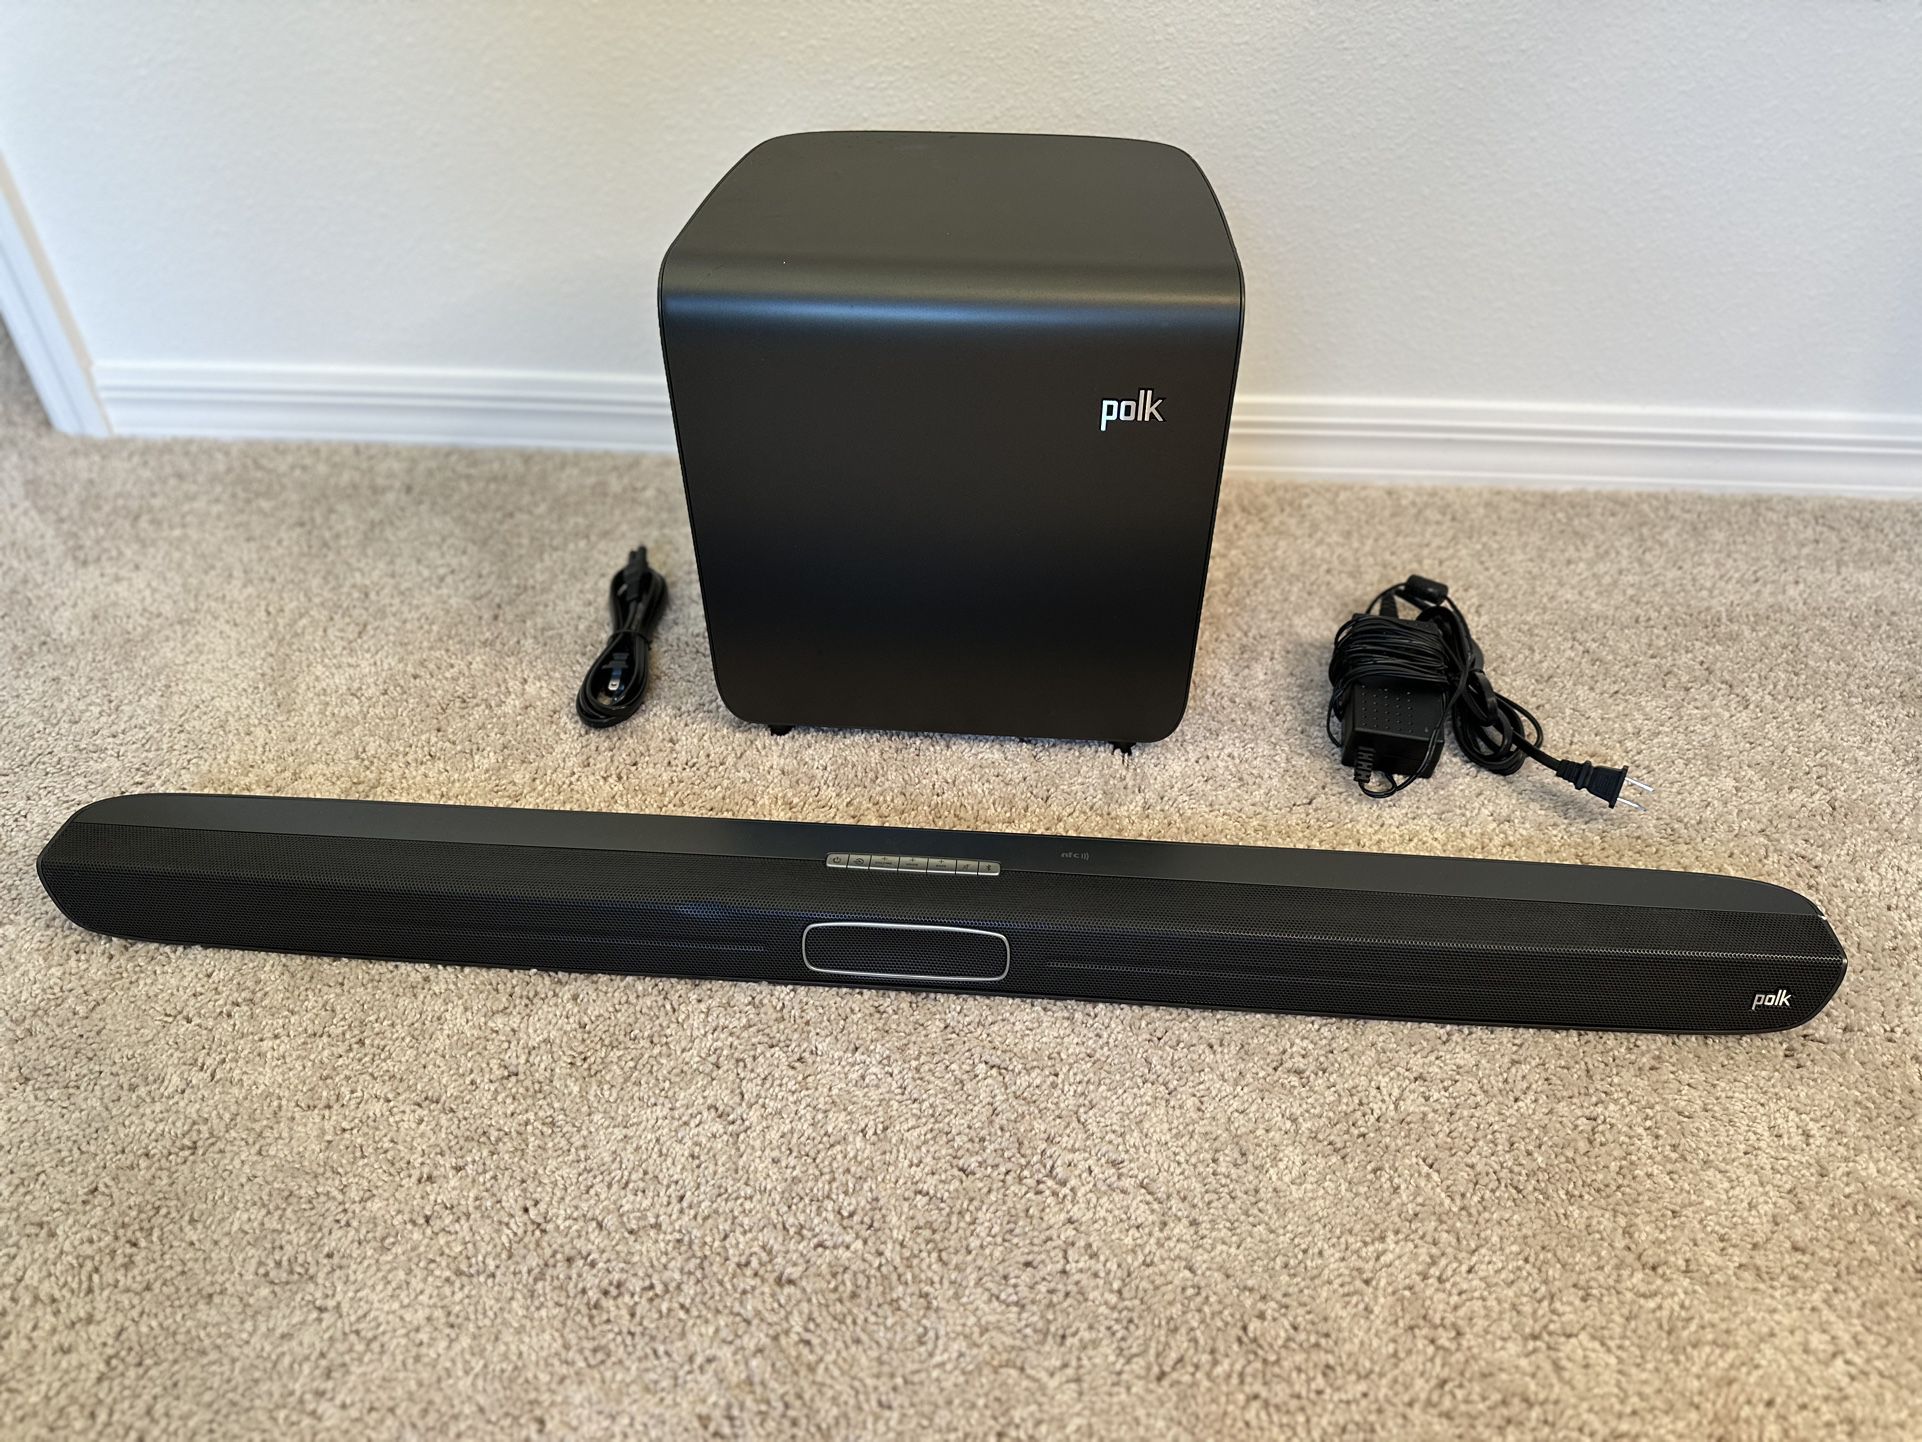 Polk Magnifi Home Theater Sound Bar and Subwooofer